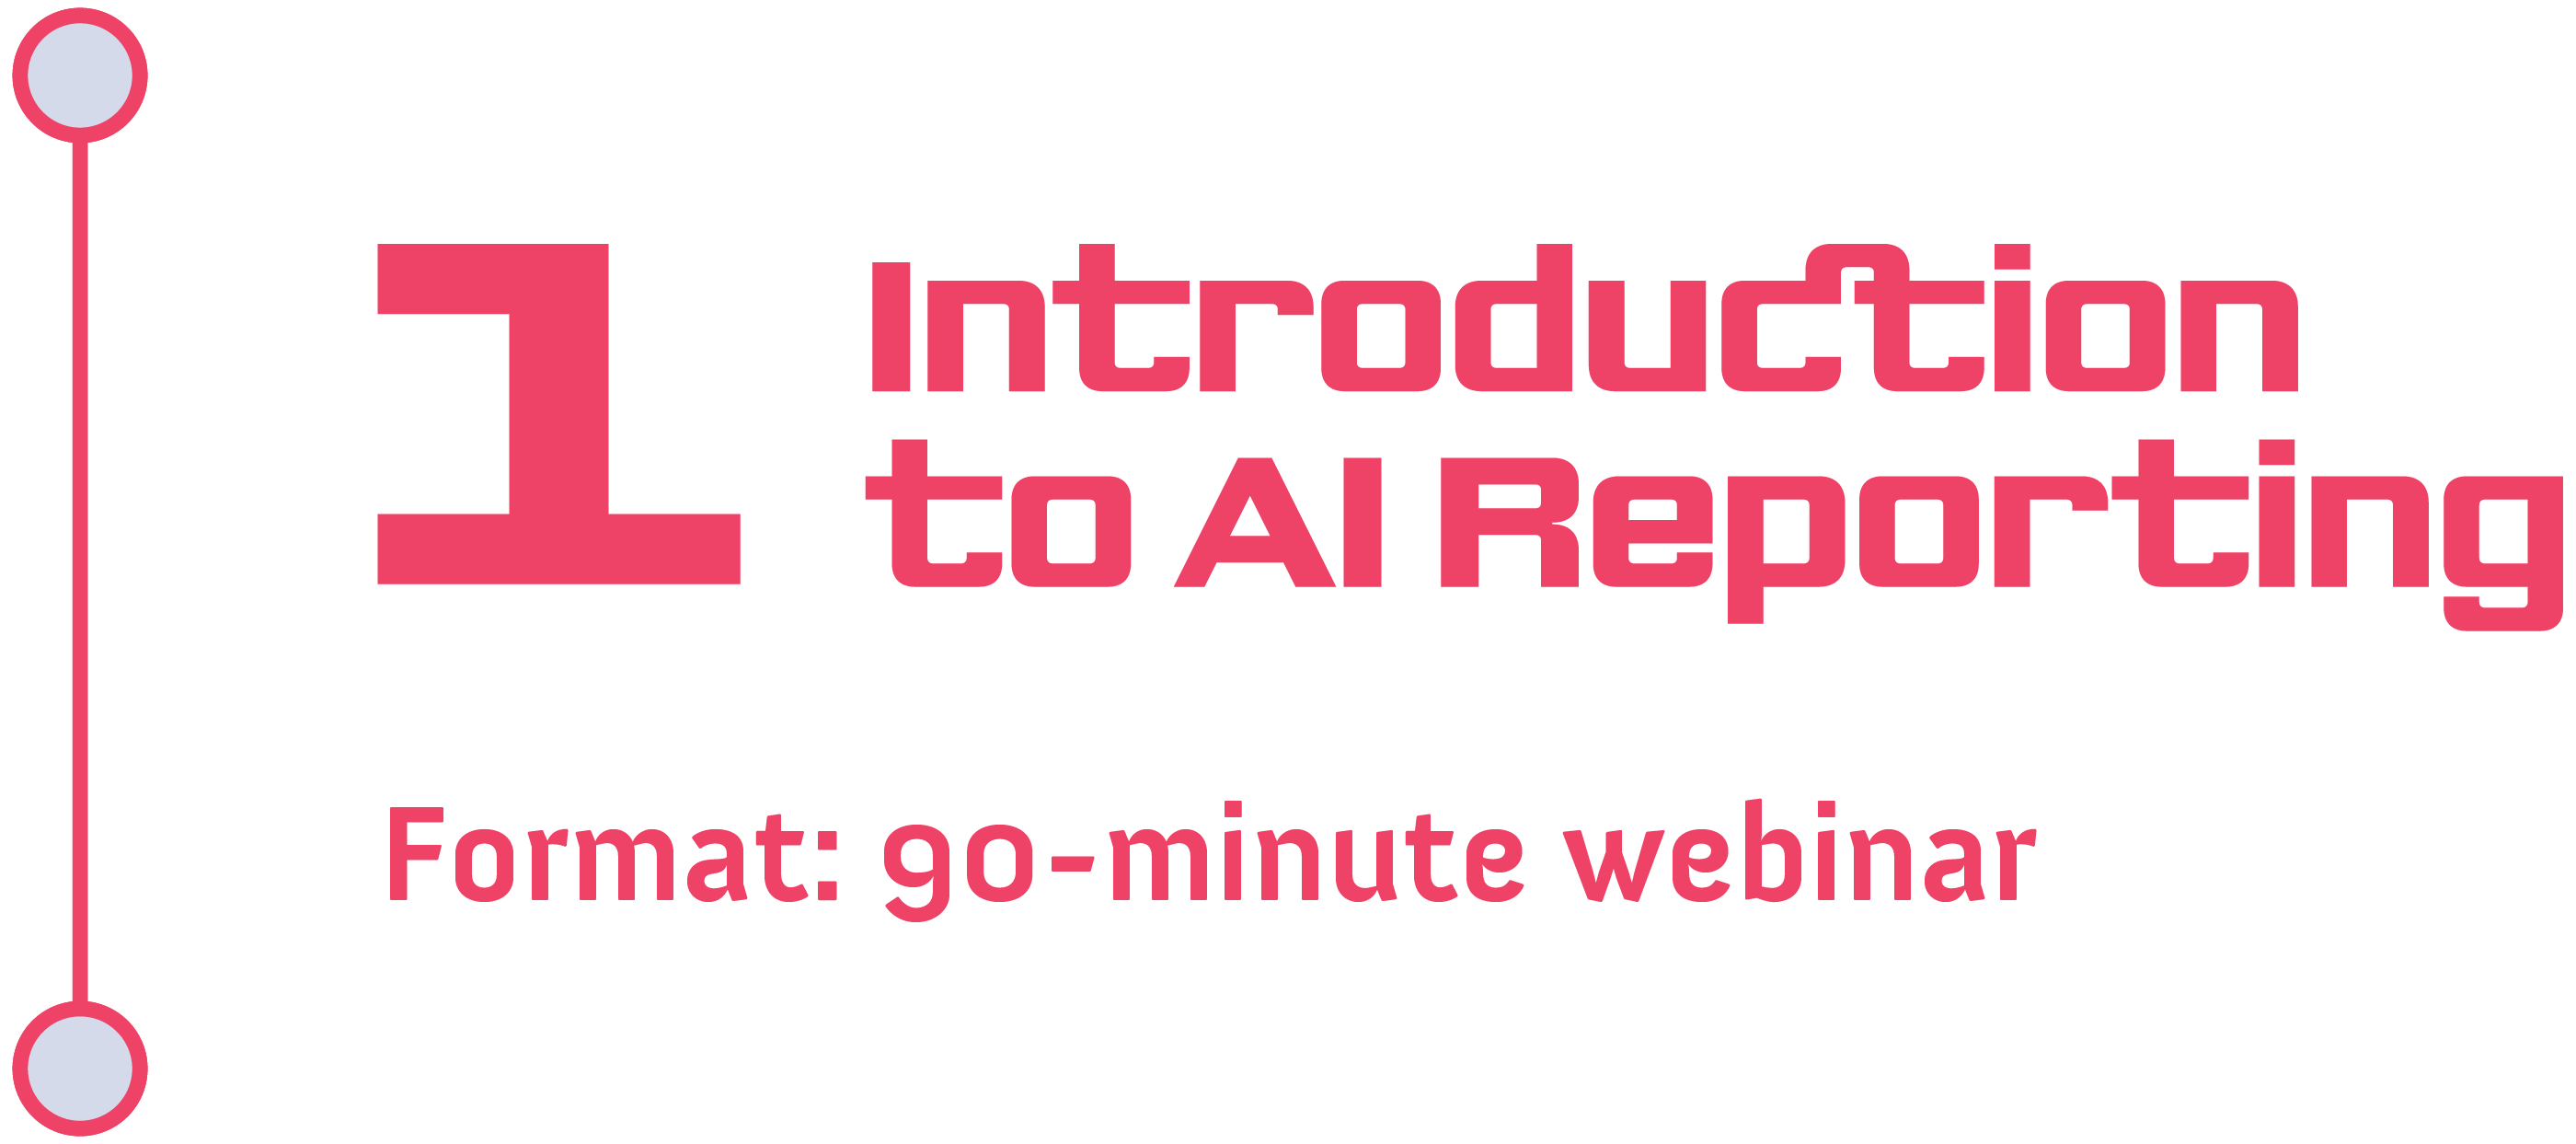 Track 1: Introduction to AI Reporting<br />
Format: 90-minute webinar